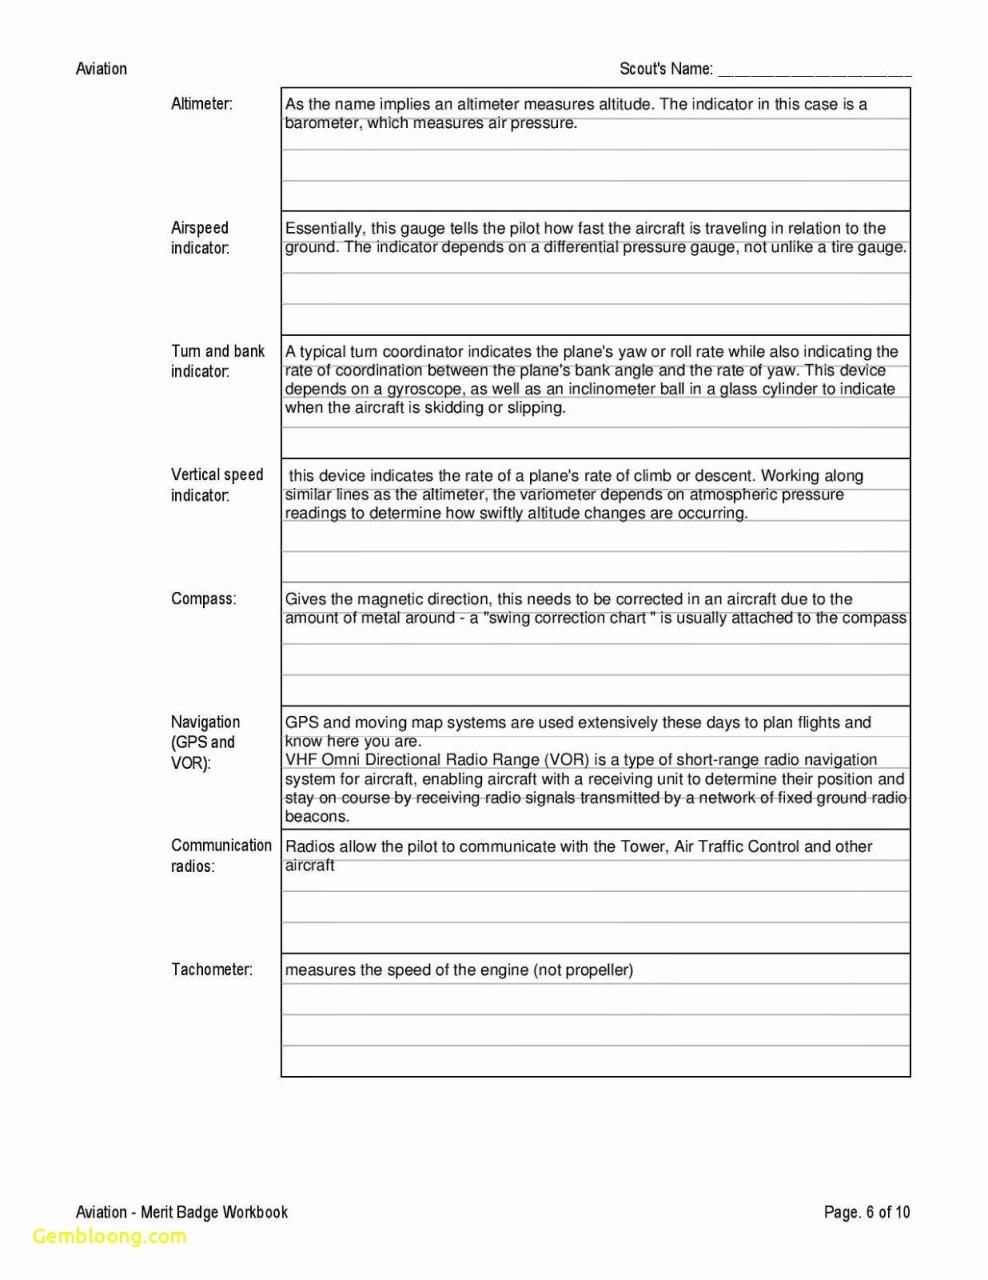 50 Fire Safety Merit Badge Worksheet Chessmuseum Template Library